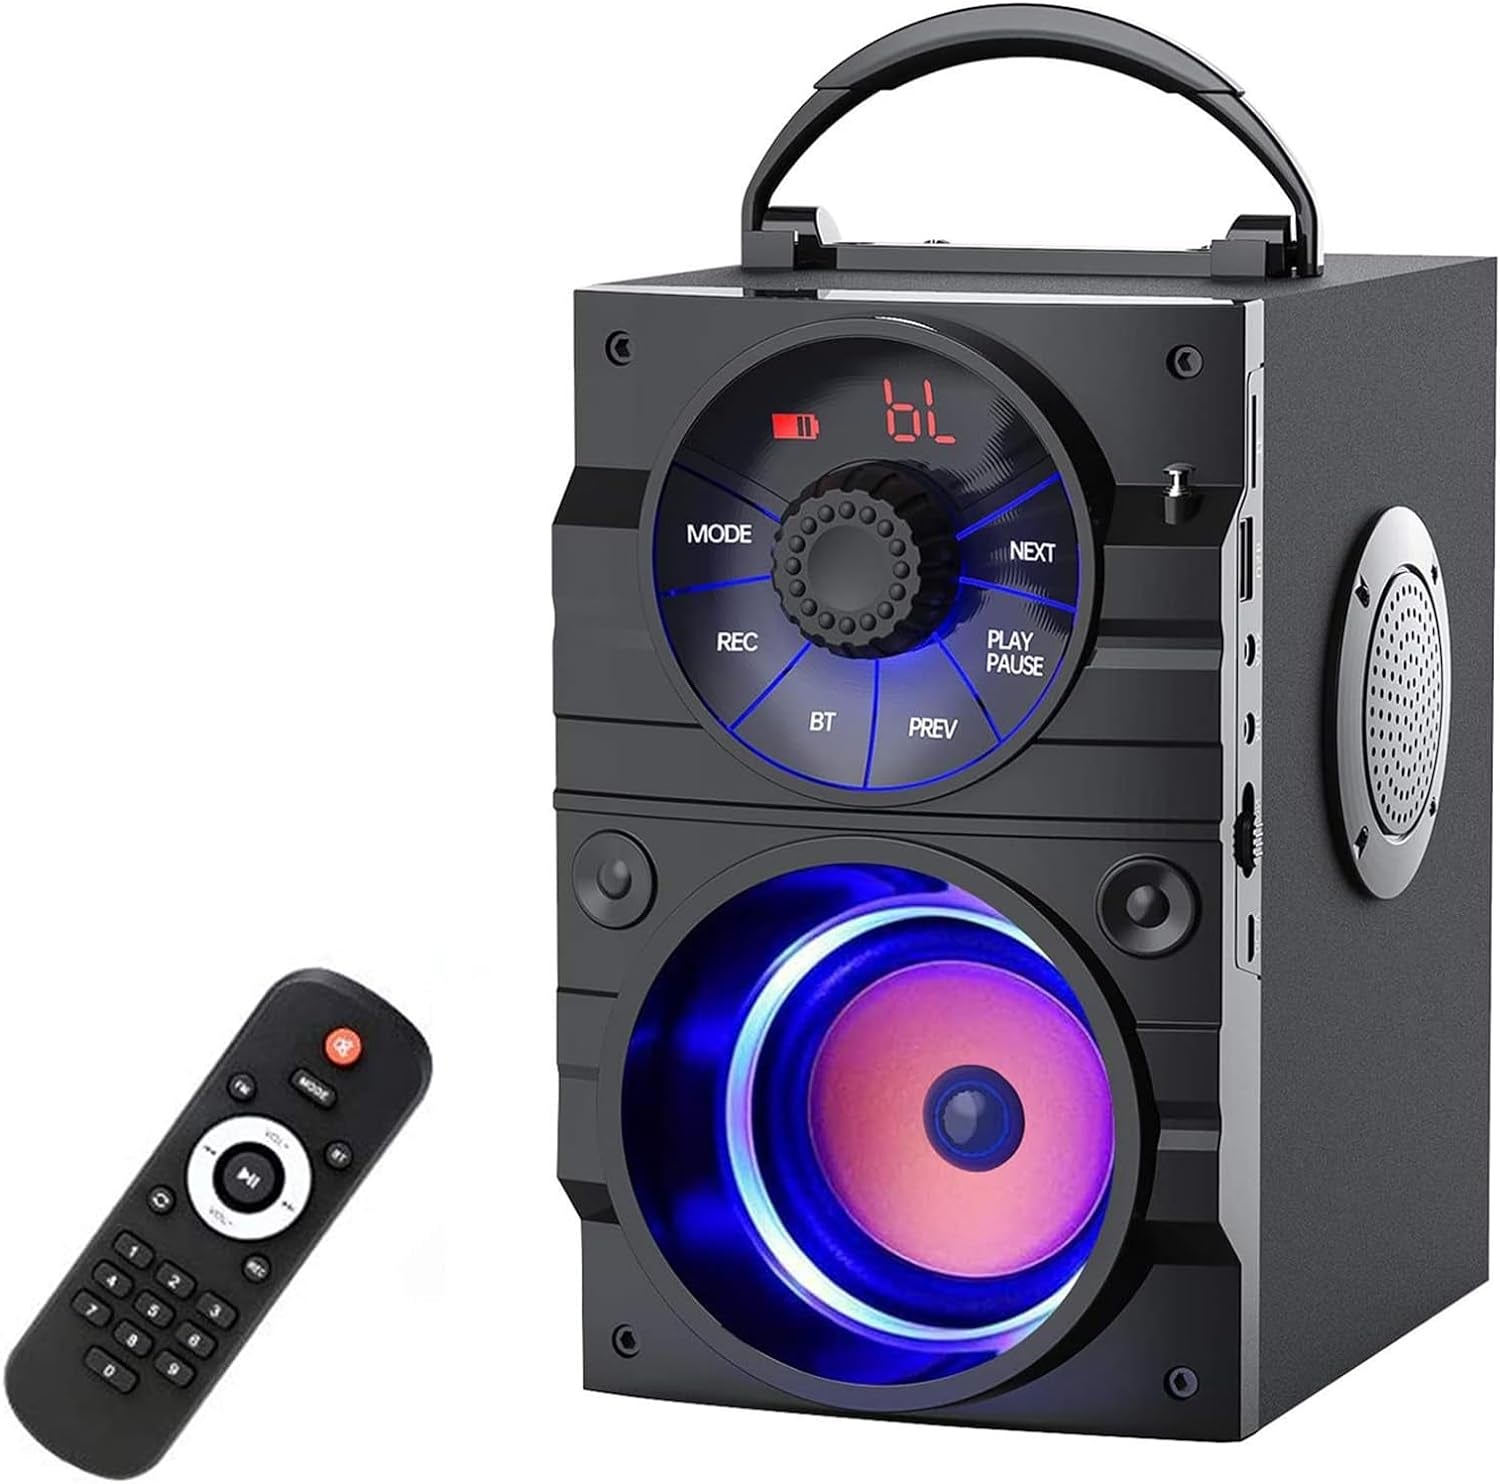 Portable Bluetooth Party Speaker with Subwoofer, Heavy Bass, Wireless, FM Radio, Remote Control, LCD Display - for Outdoor/Indoor, Home, Phone, PC